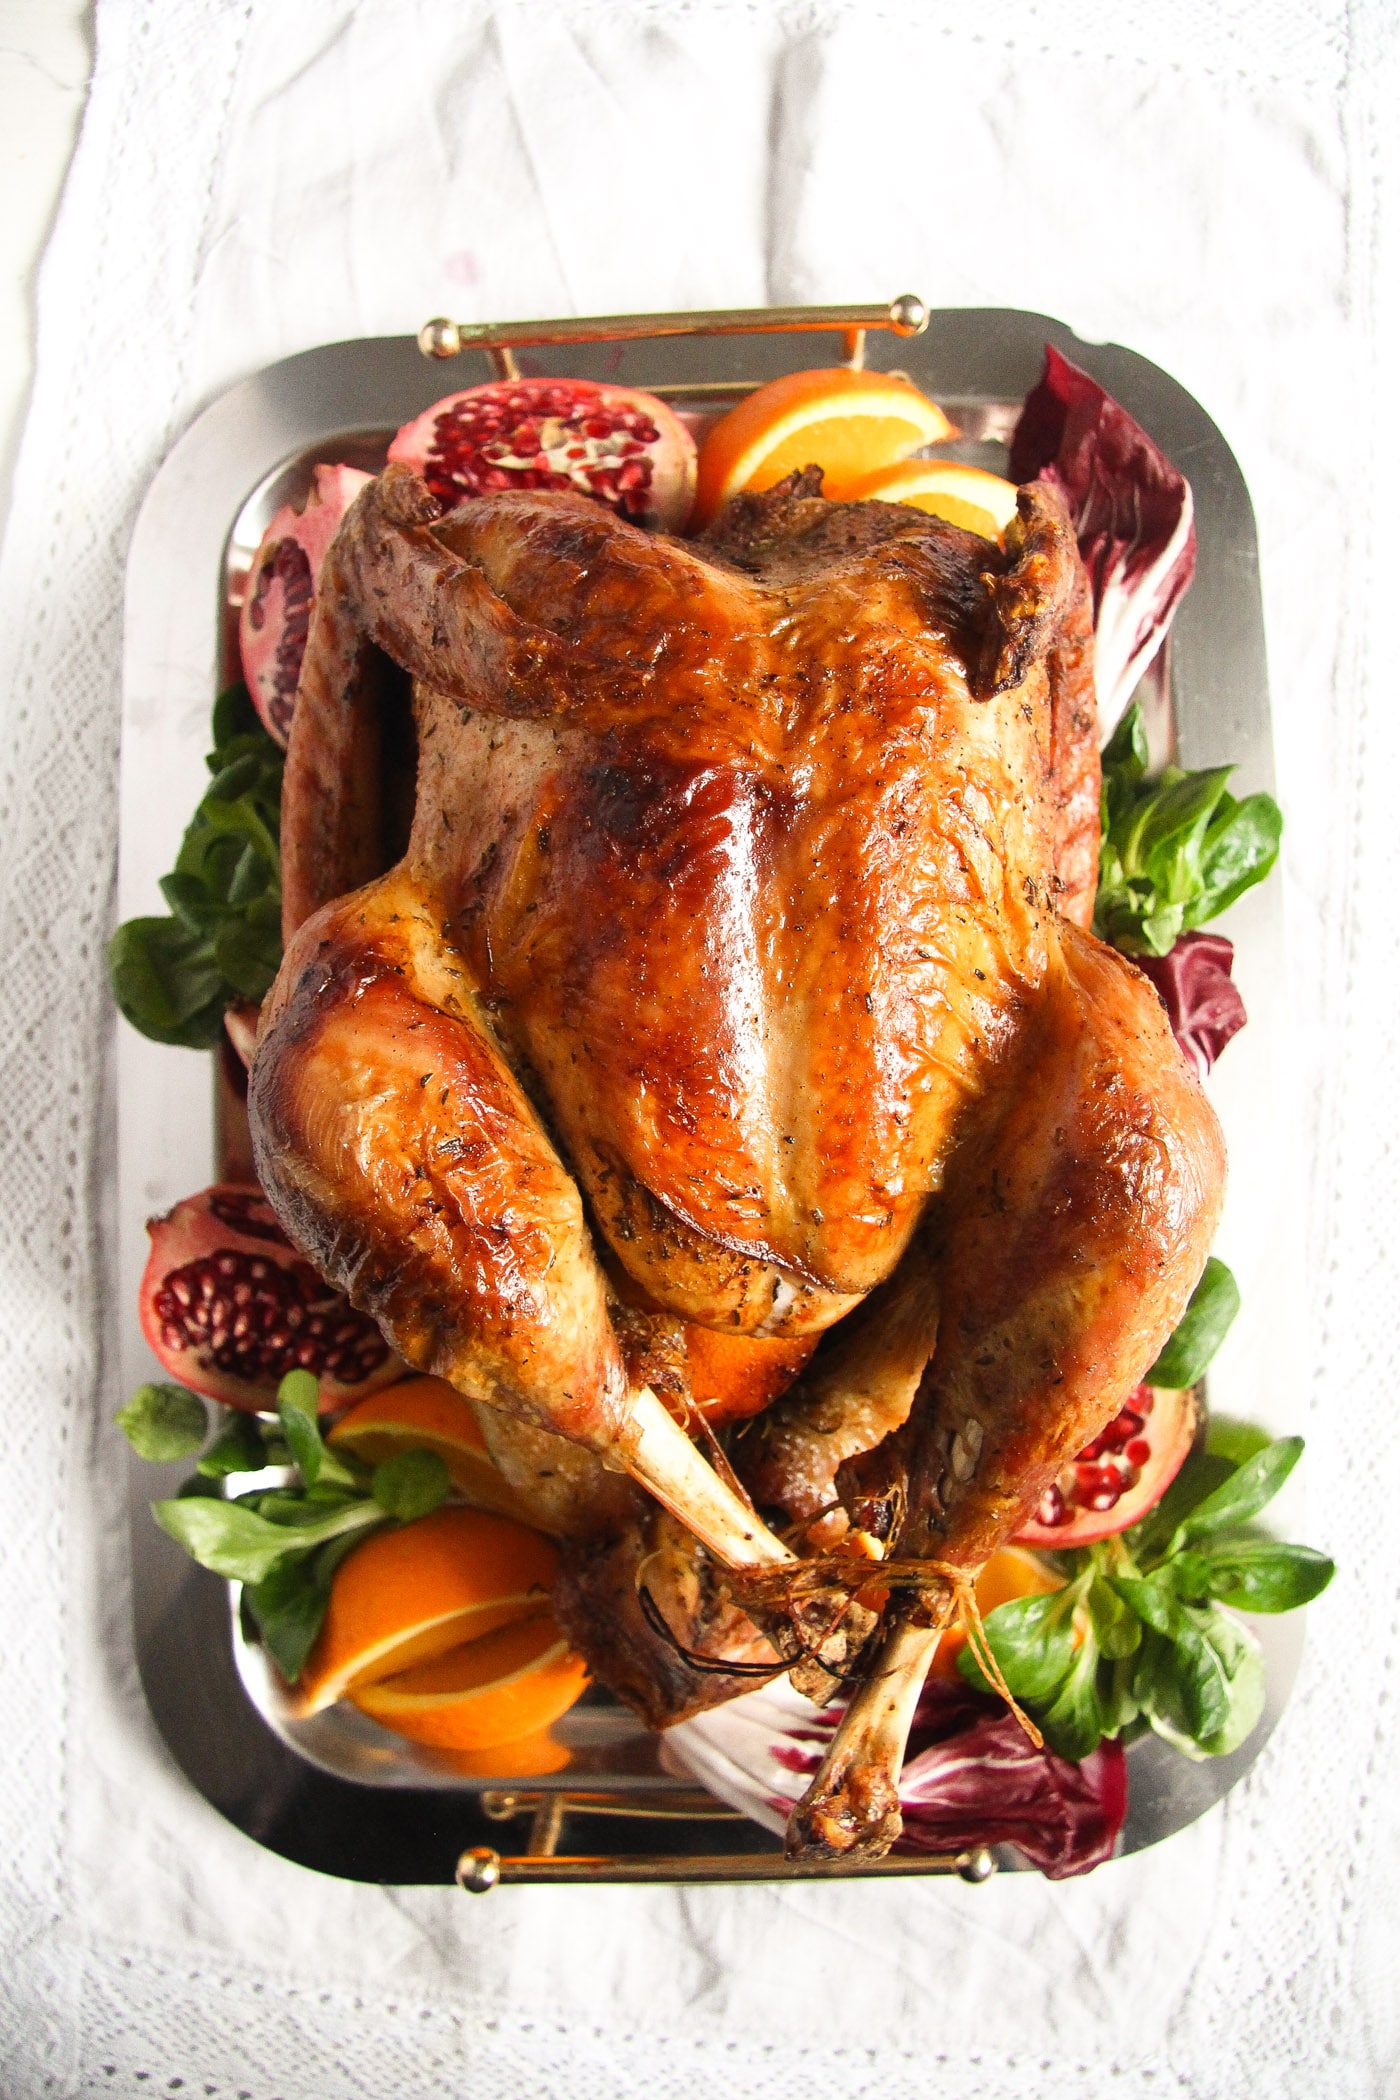 turkey served with oranges, pomegranate and salad leaves